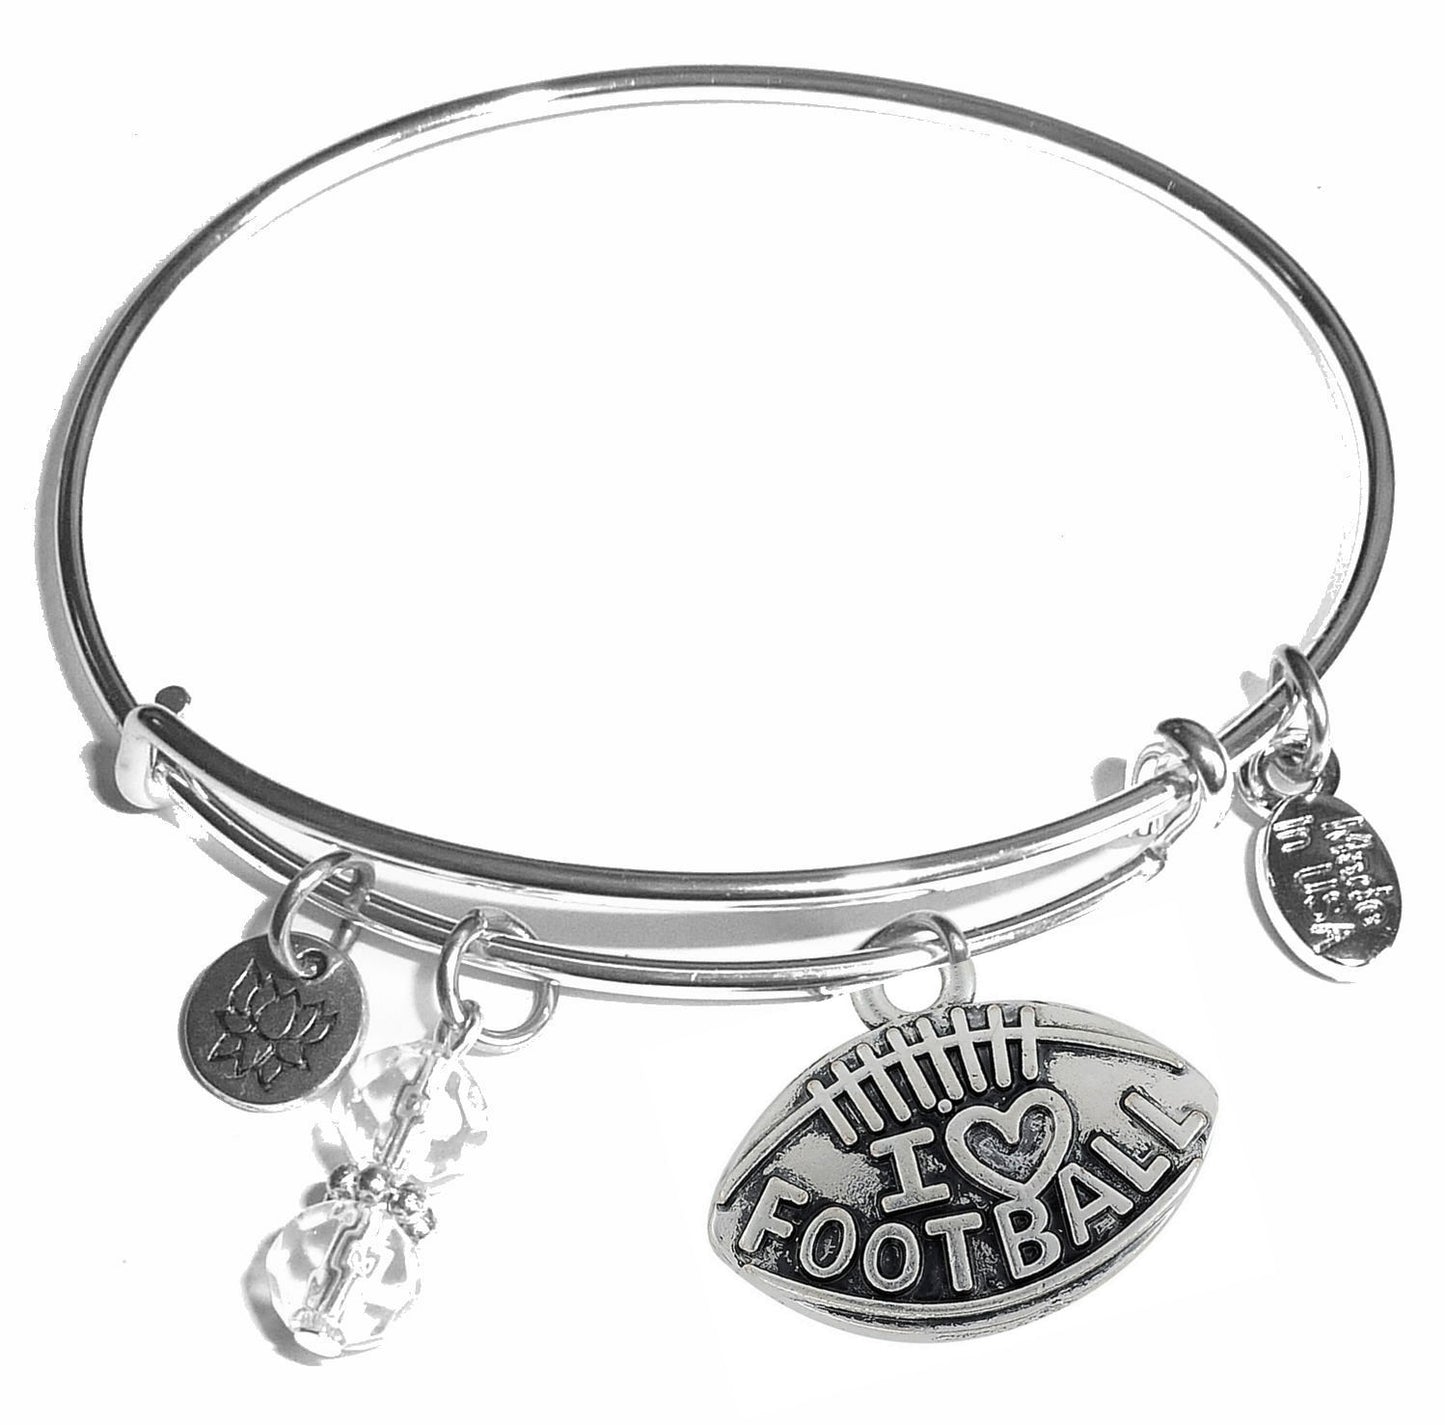 I Love Football - Message Bangle Bracelet - Expandable Wire Bracelet– Comes in a gift box